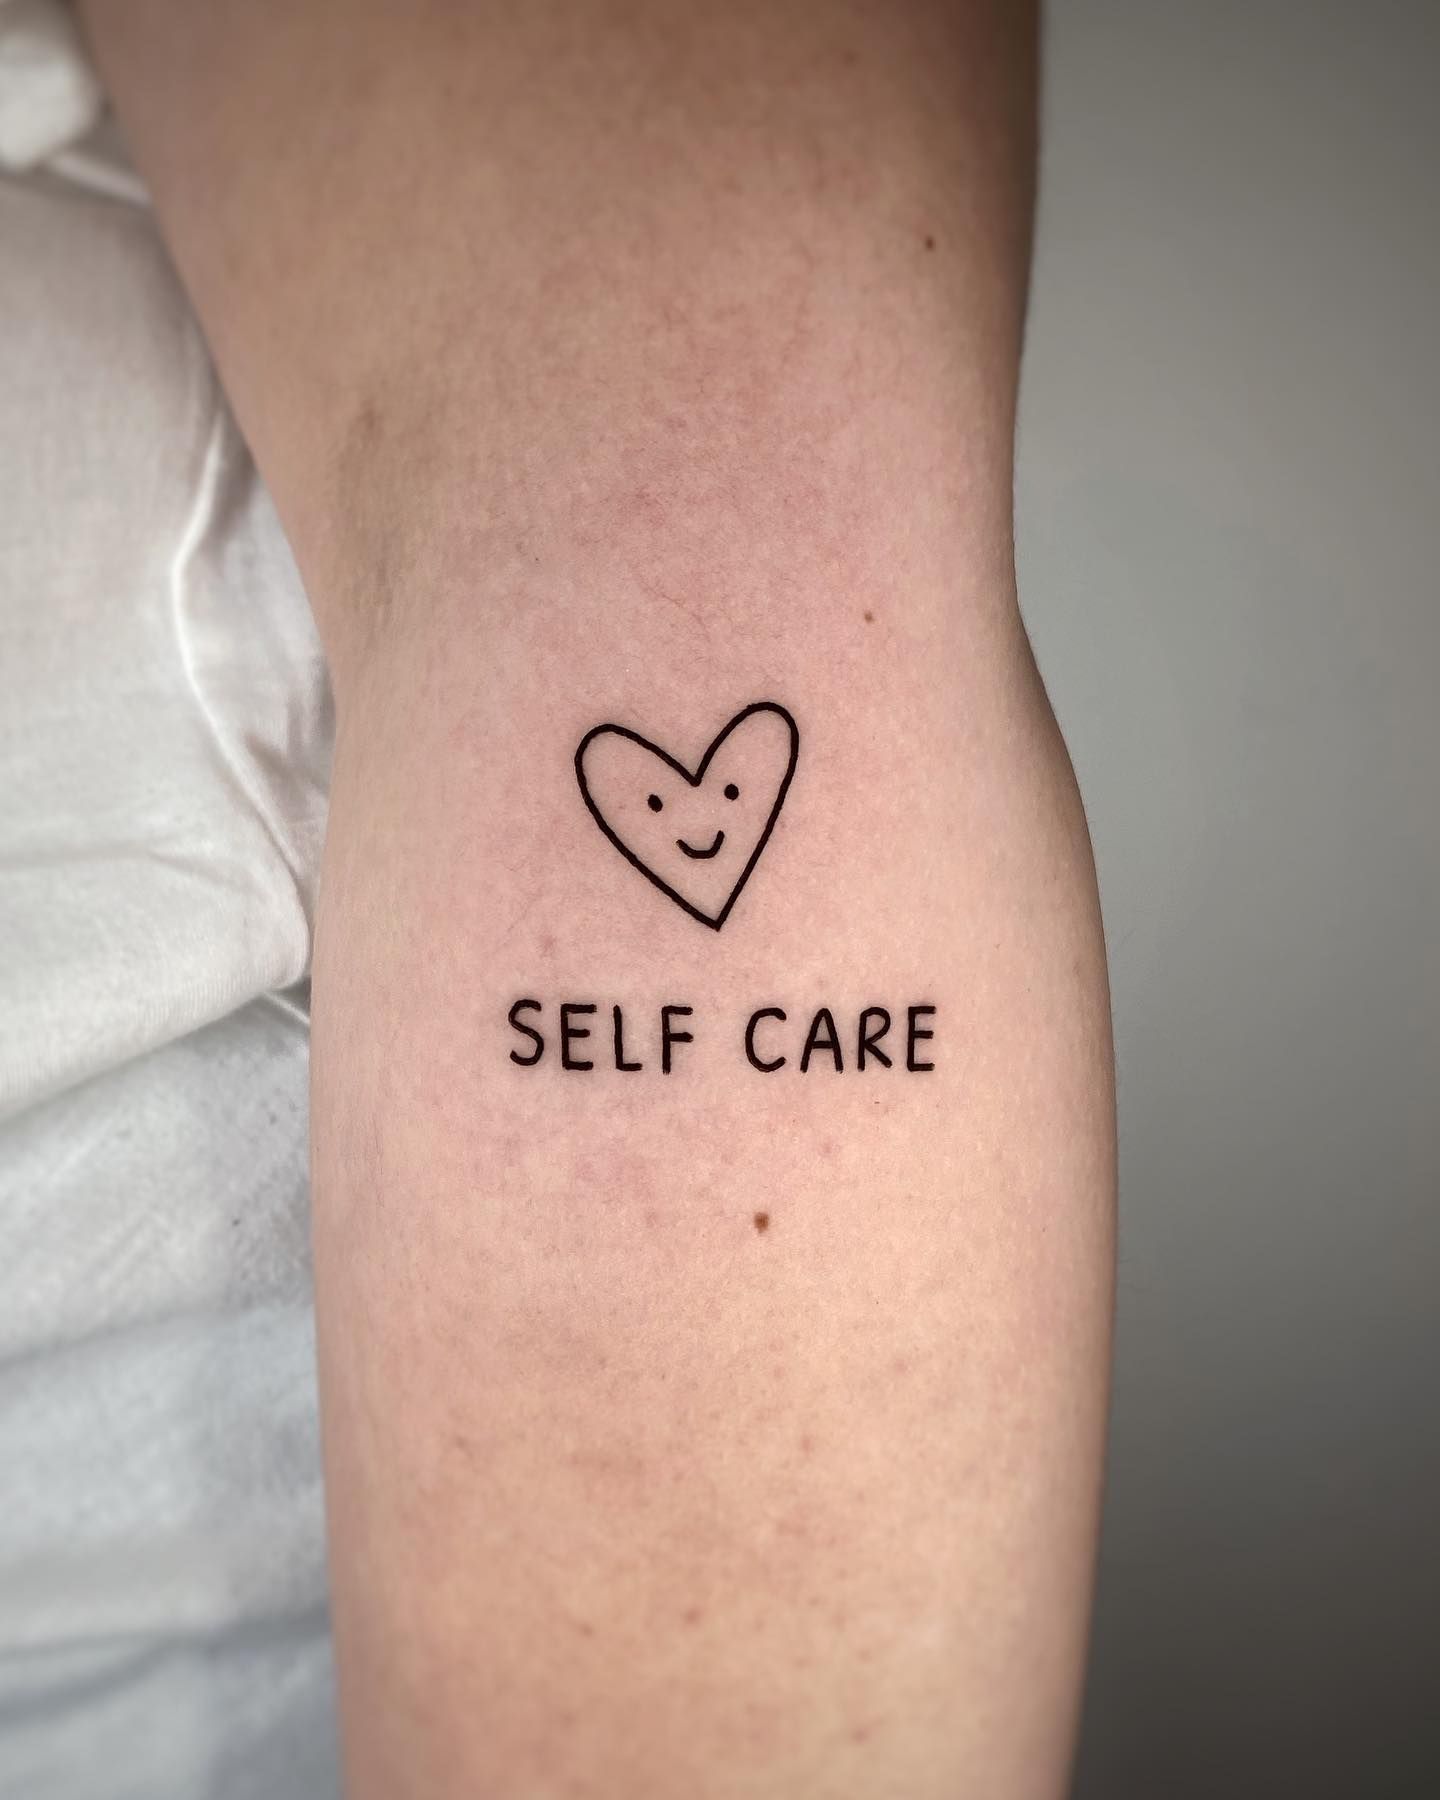 Tattoo Aftercare: How To Care For Your New Tattoo • Tattoodo